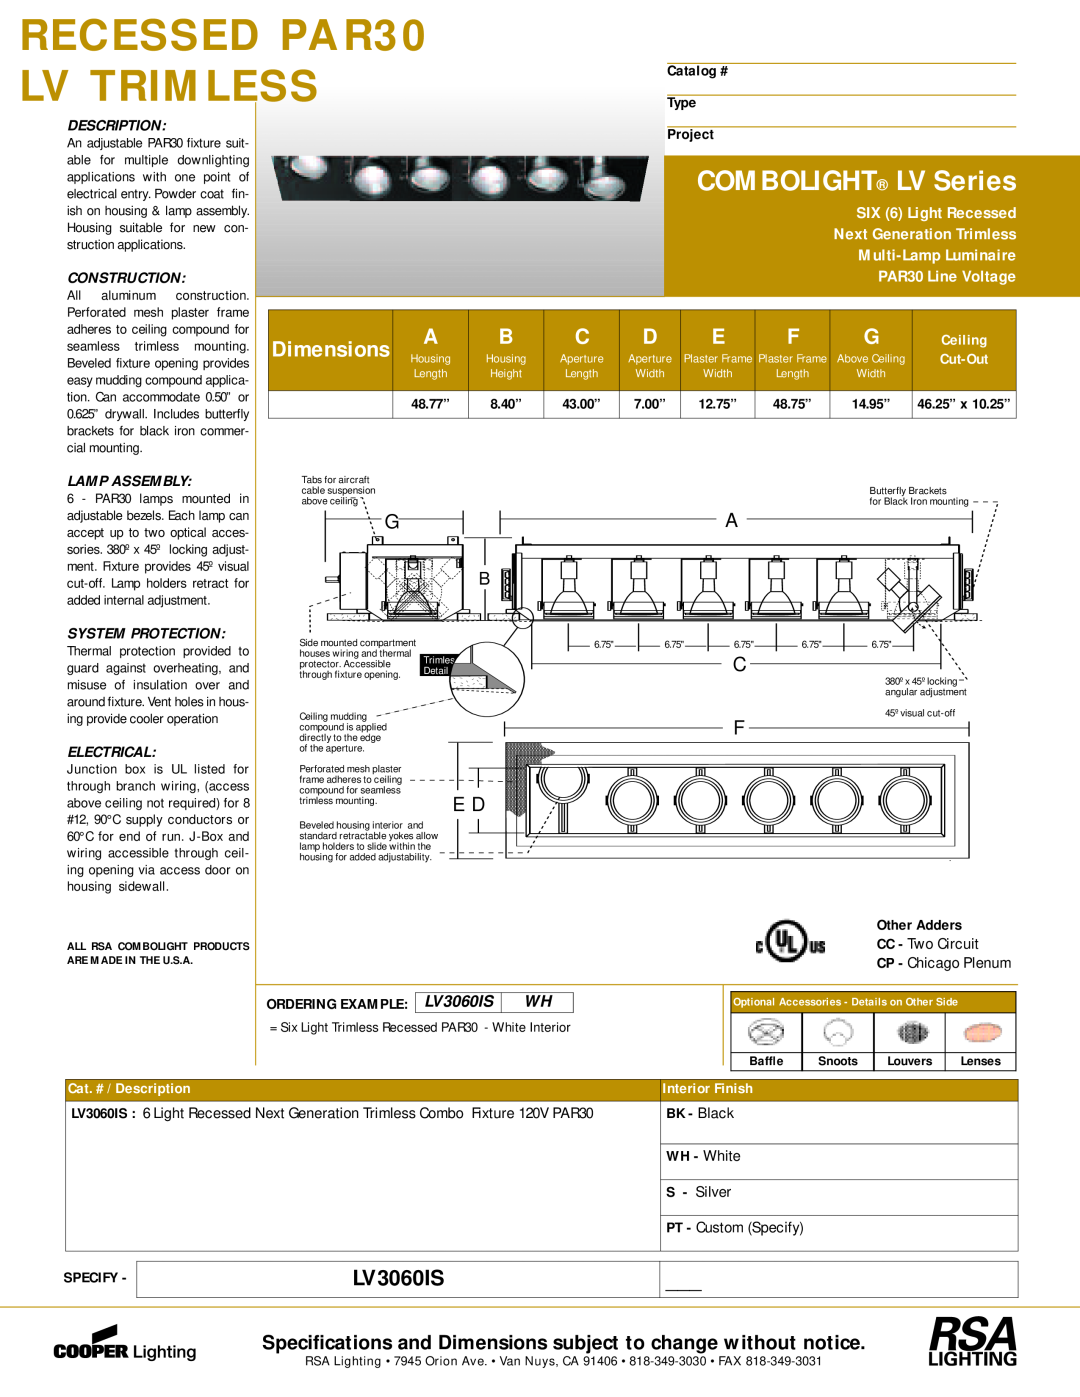 Cooper Lighting LV3060IS dimensions RECESSED PAR30, Lv Trimless, COMBOLIGHT LV Series, Dimensions, SIX 6 Light Recessed 